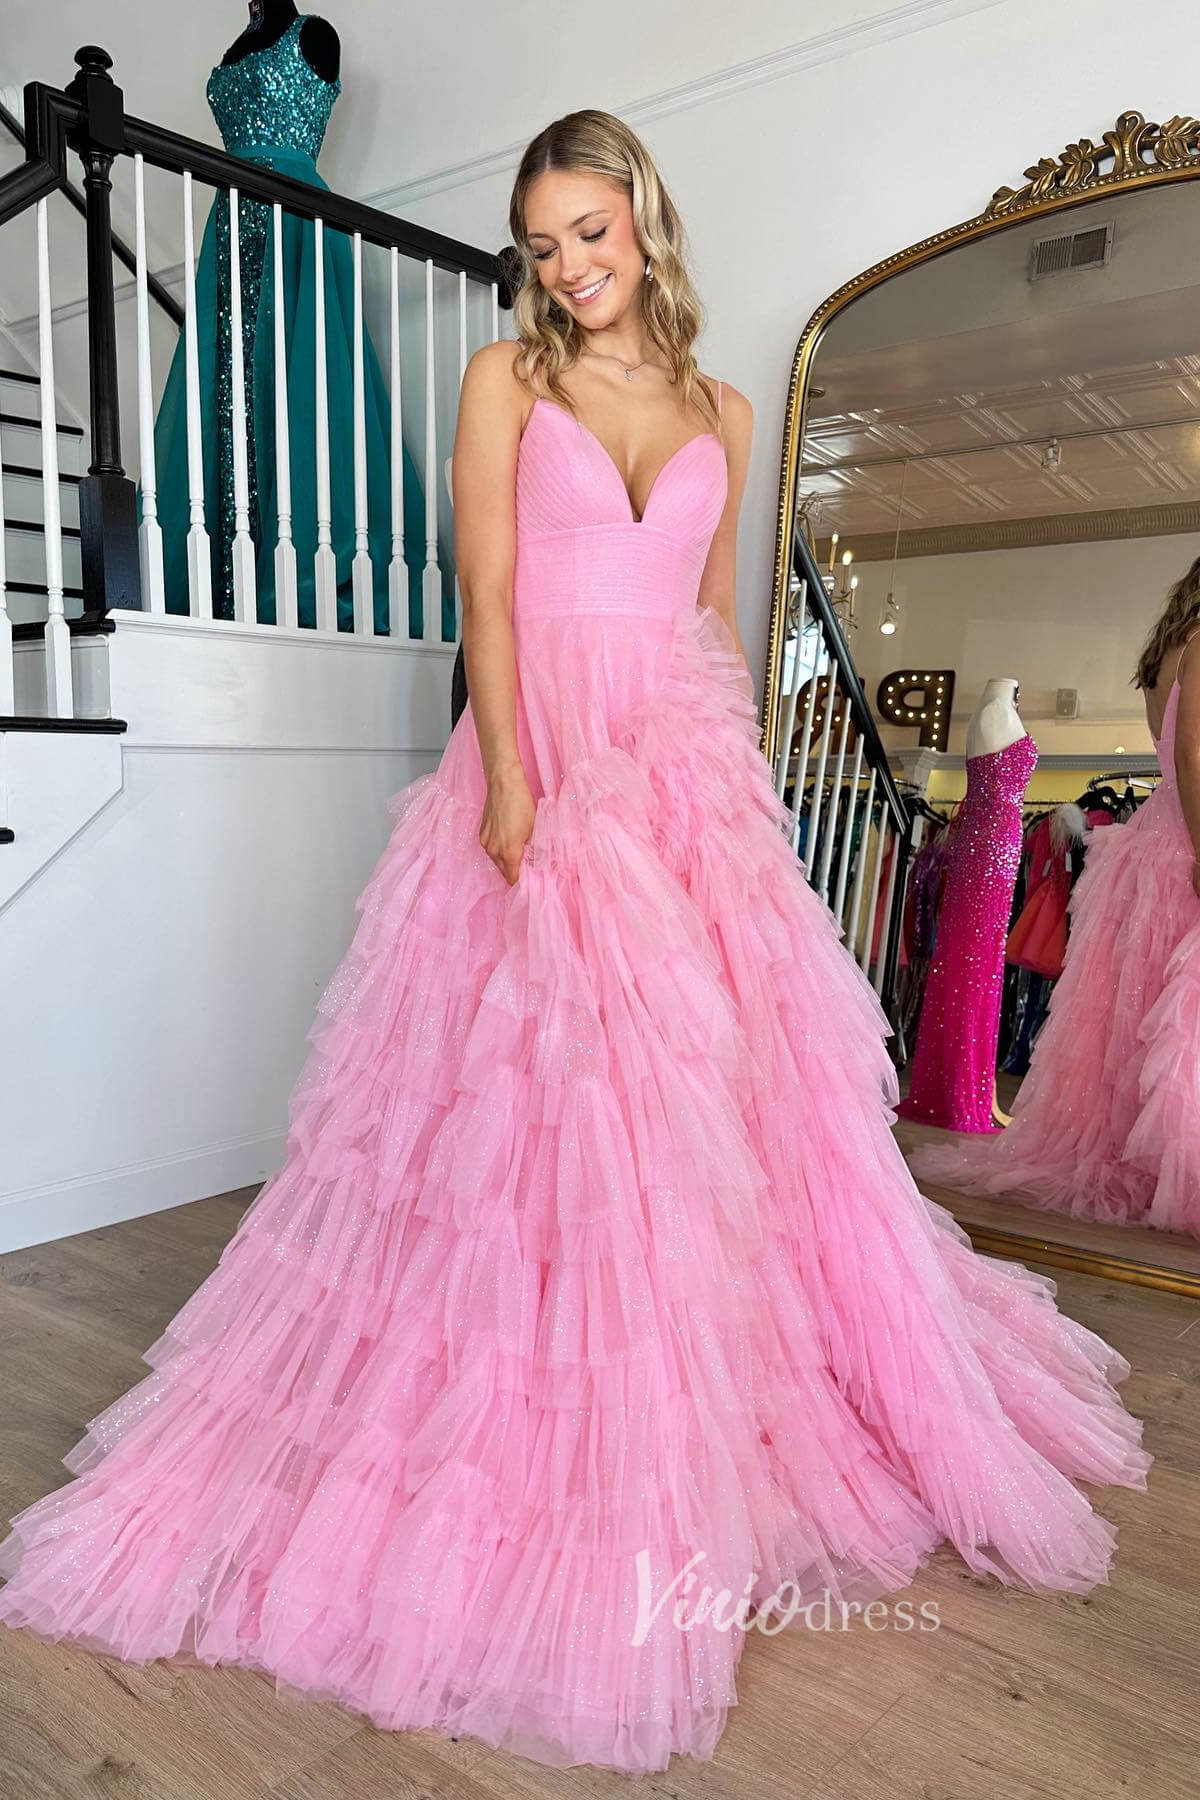 Bright Pink Ruffle Prom Dresses Tiered Ball Gown with Slit FD3509-prom dresses-Viniodress-Pink-Custom Size-Viniodress